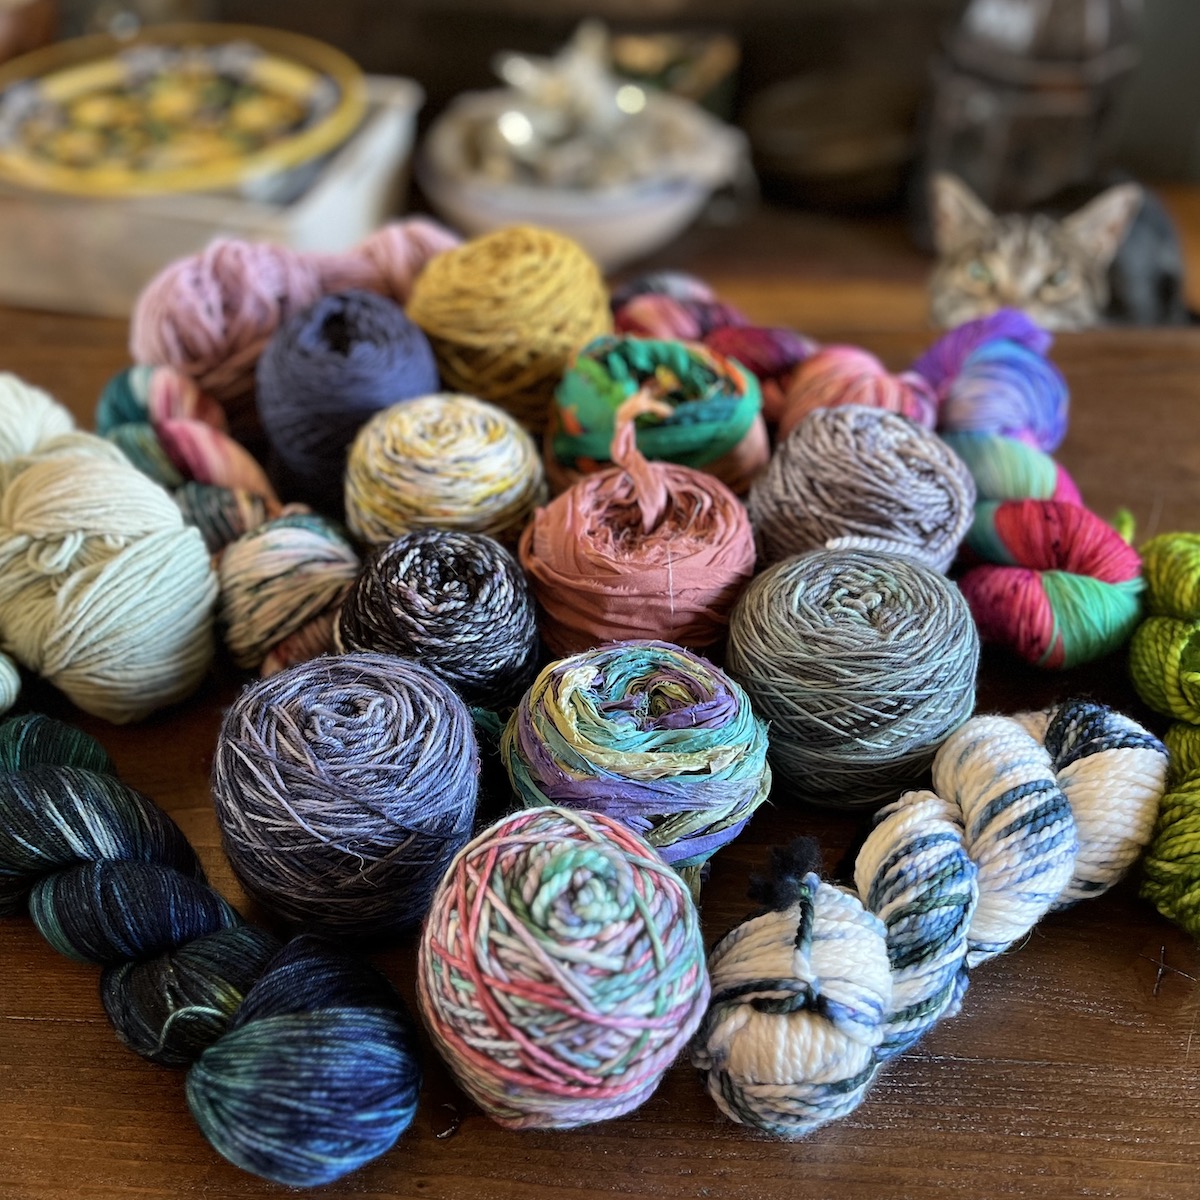 An image of yarn spools on a table. A cat hides in the background.